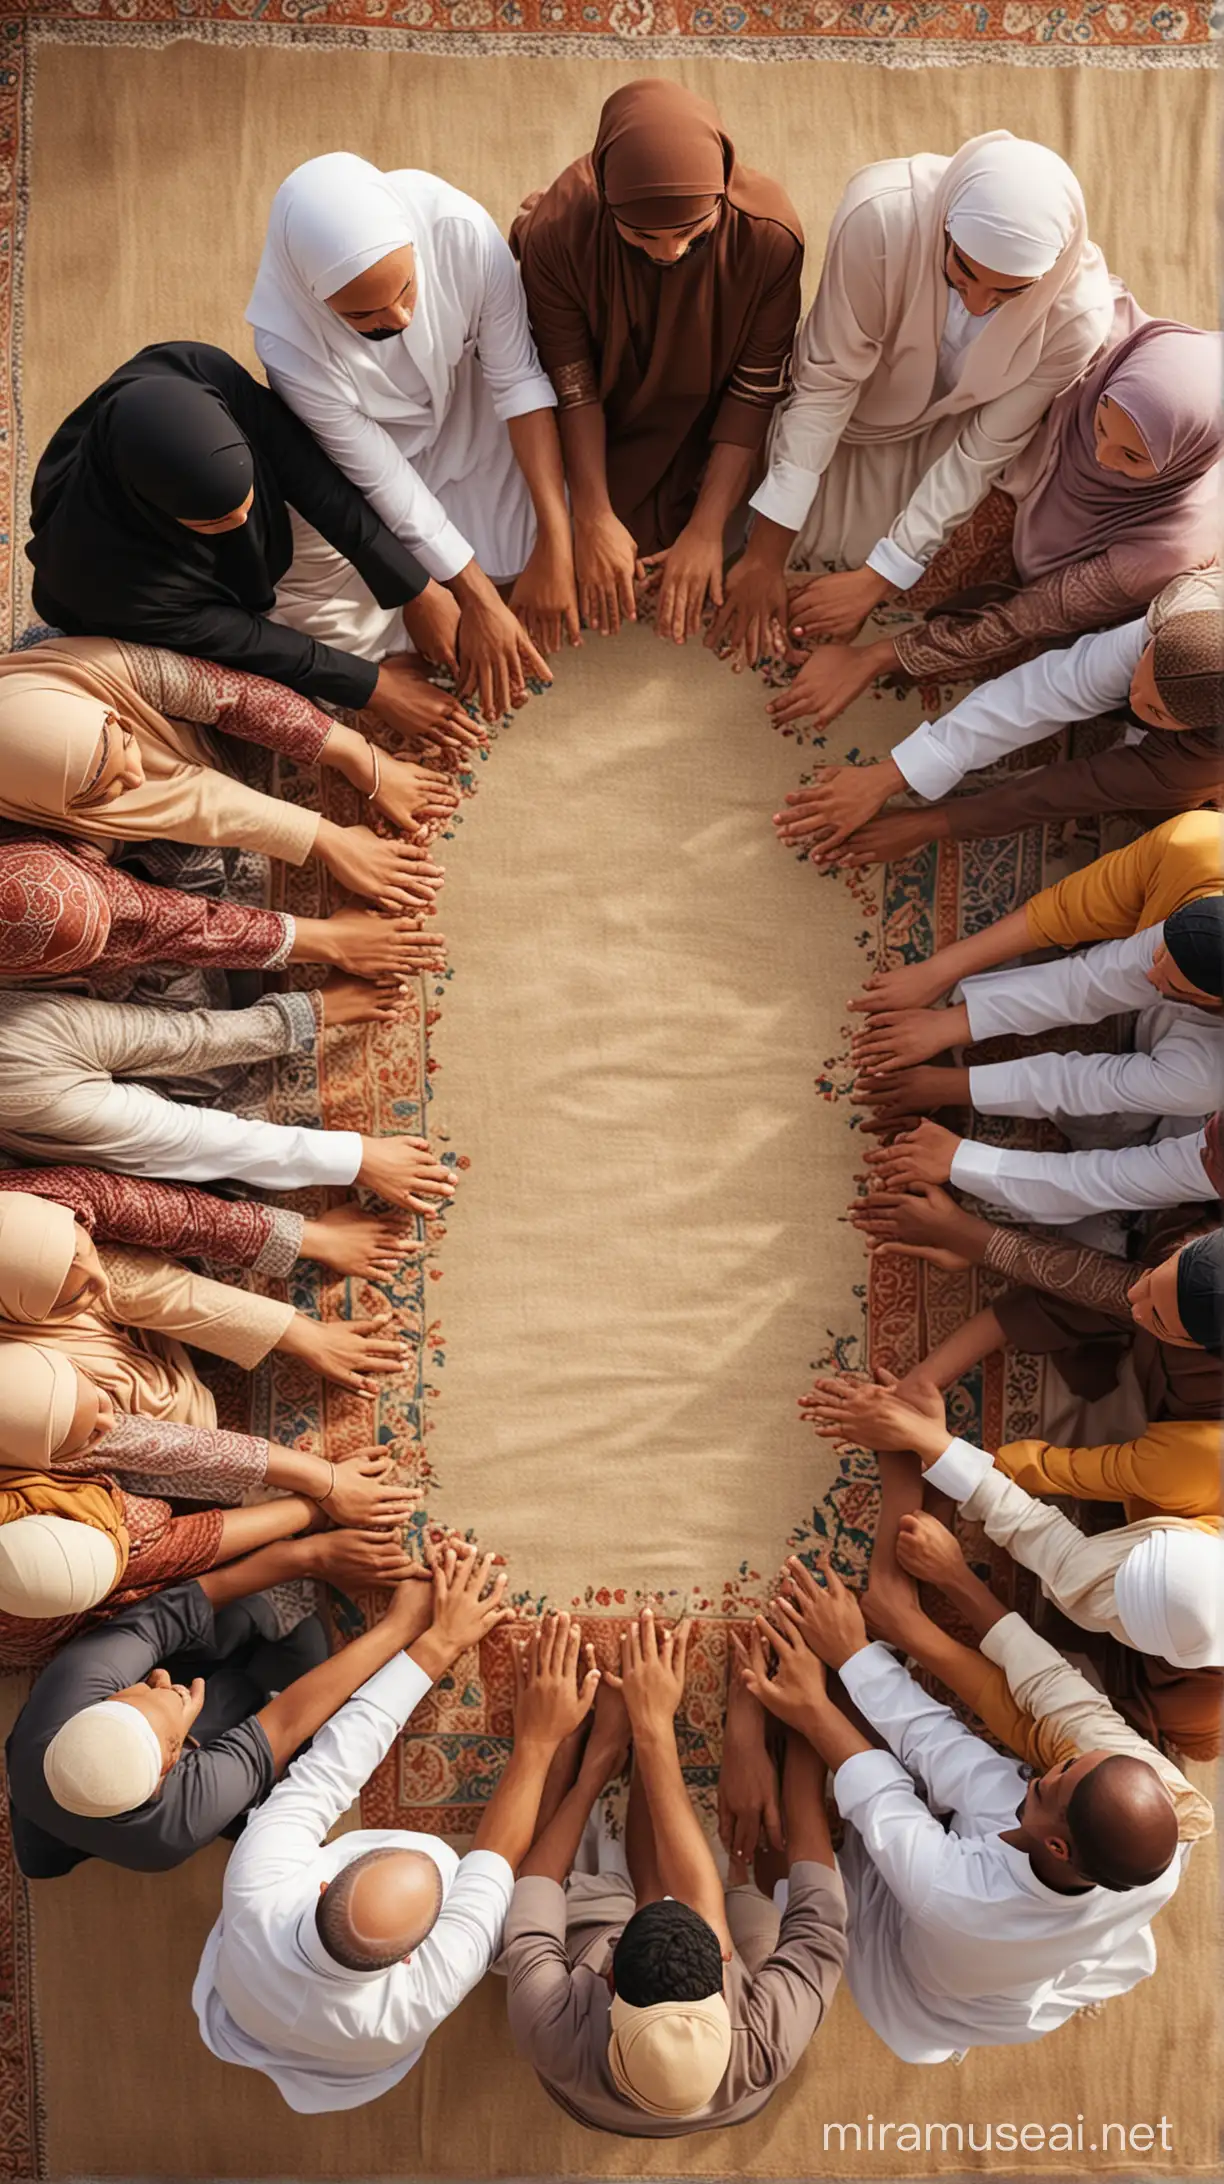 Multicultural Unity Diverse Muslims Holding Hands in Circle